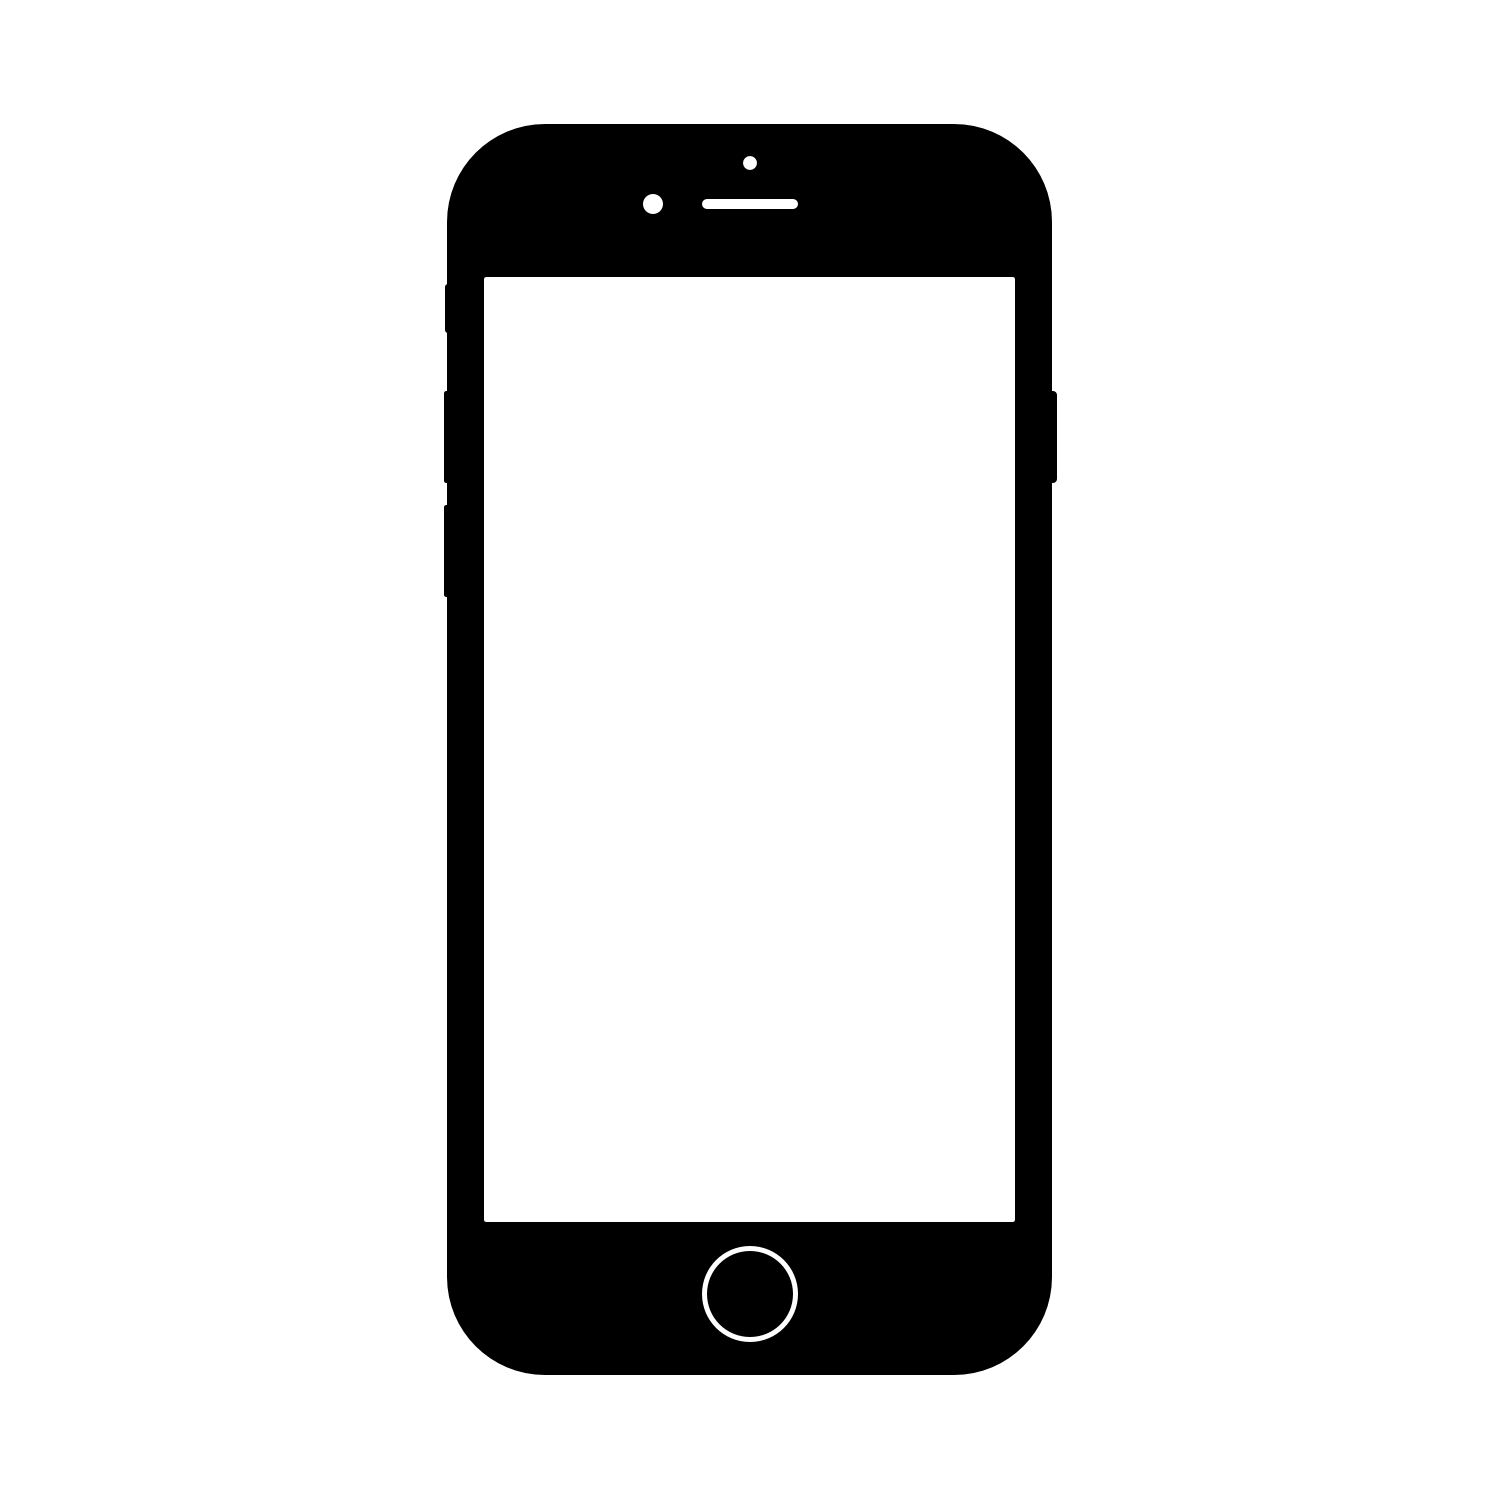 6 iPhone Icon Template